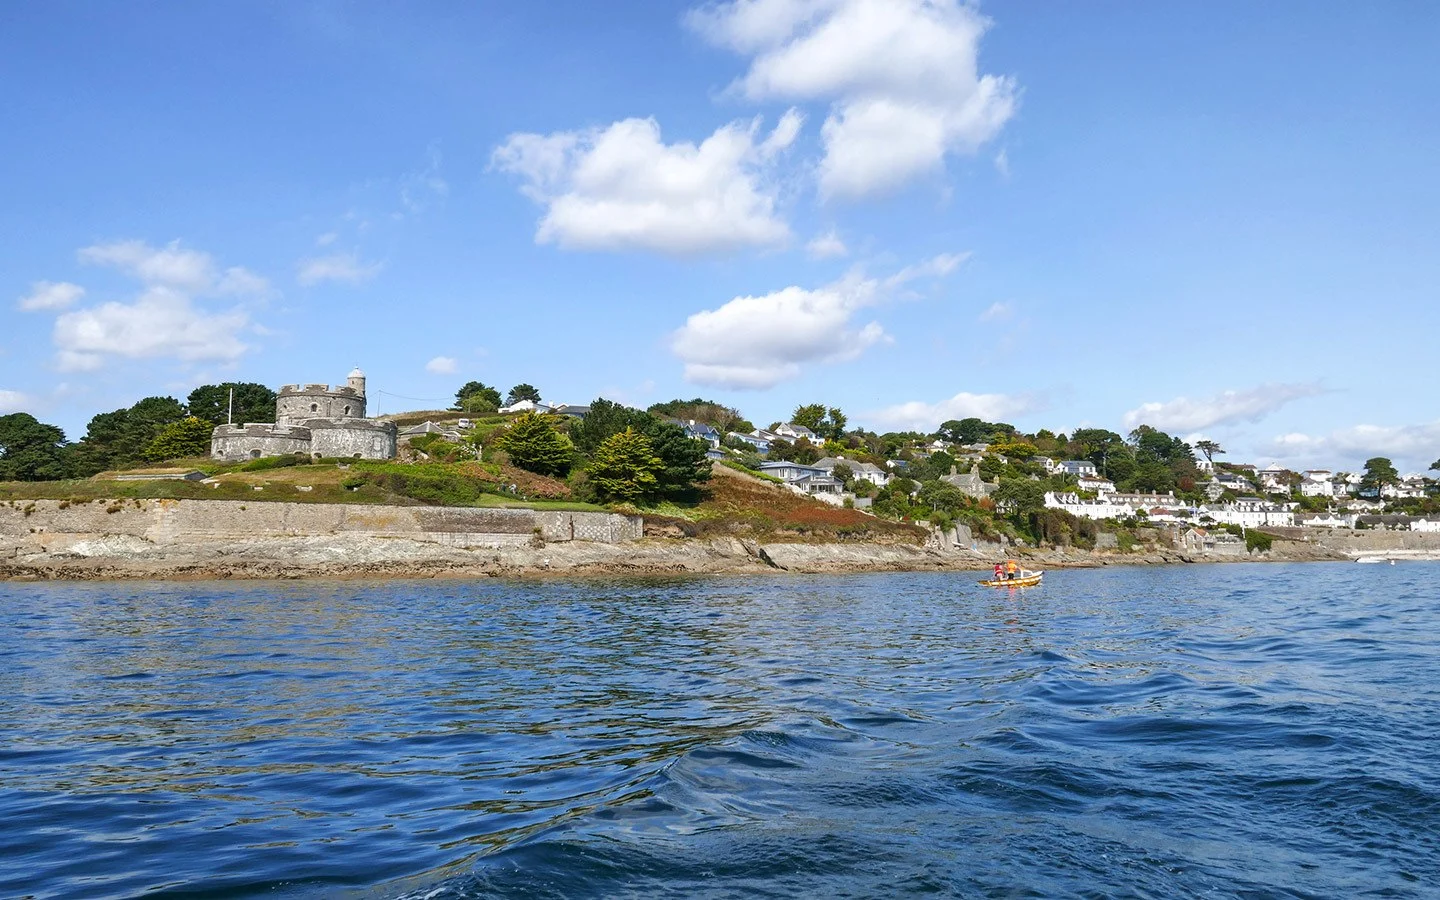 St Mawes Castle and coastline